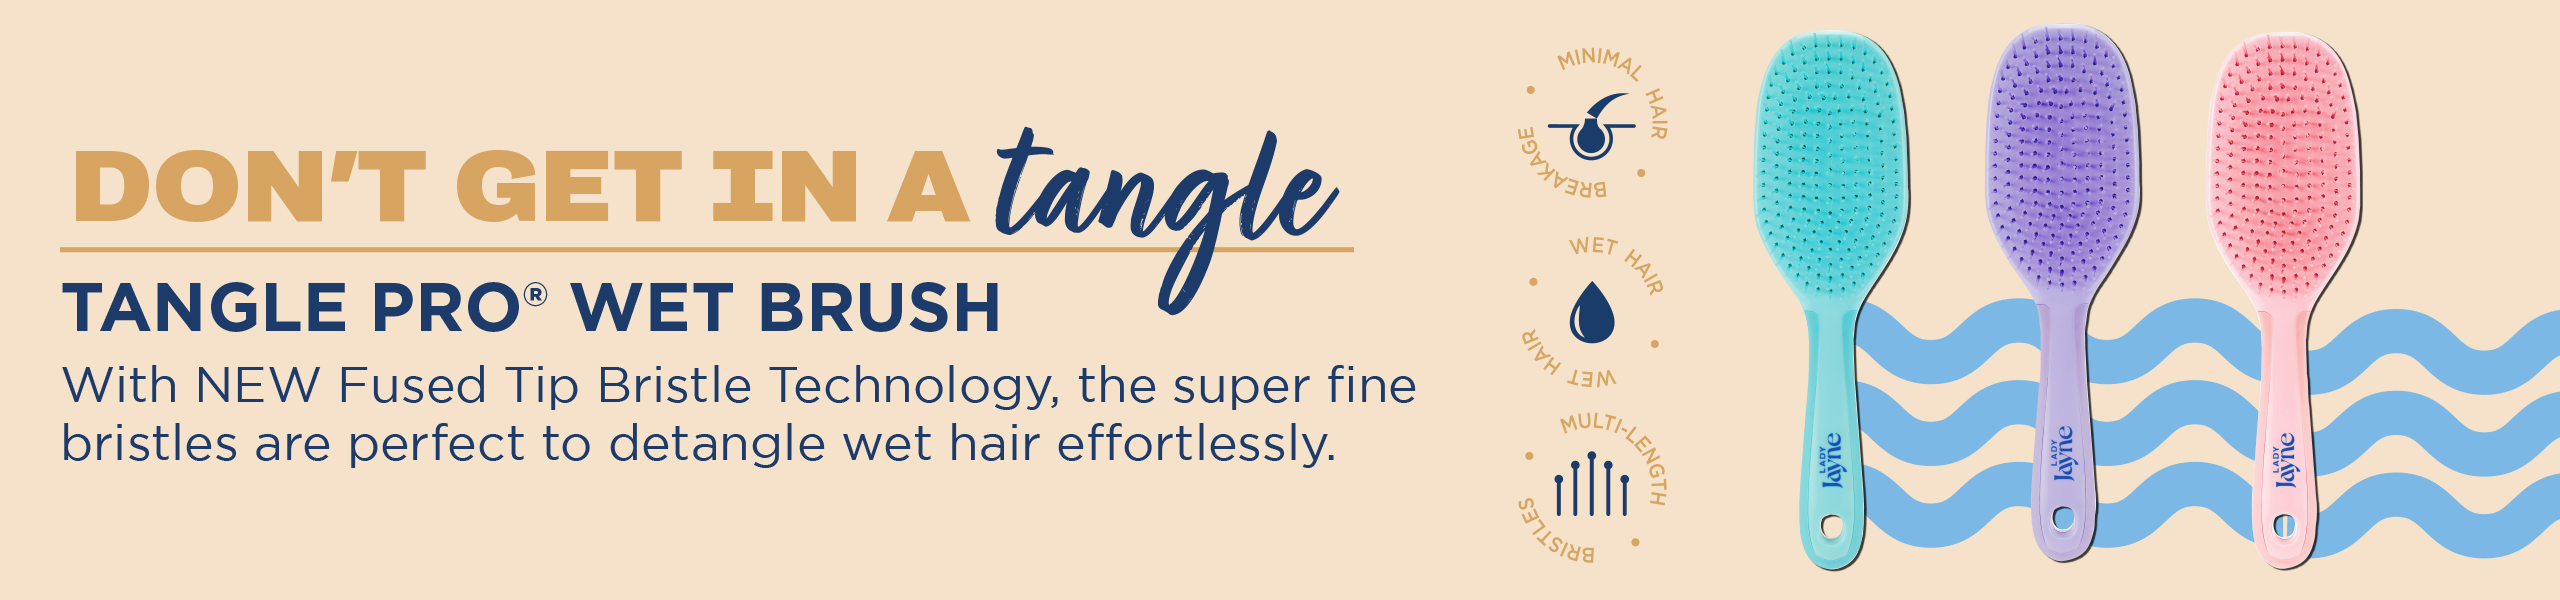 NEW Tangle Pro Wet Detangling Brush with fused tip bristle technology, the super fine bristles are perfect to detangle wet hair effortlessly.